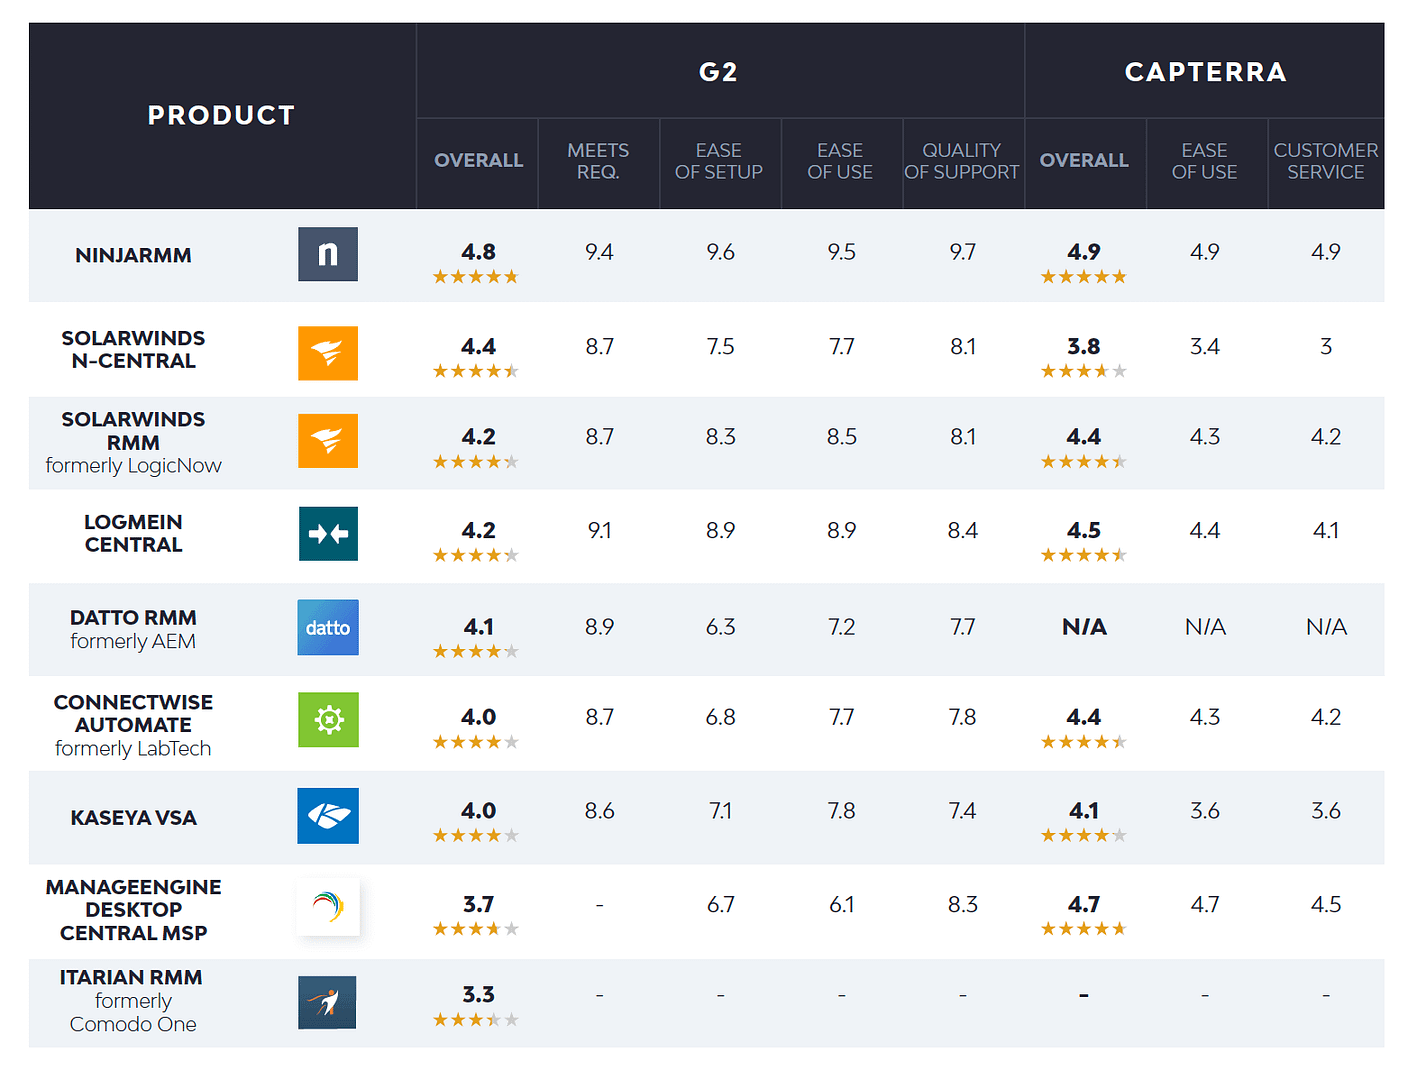 NinjaOne is rated 4.8 out of 5 by G2 and 4.9 out of 5 by Capterra in their RMM Software Ratings